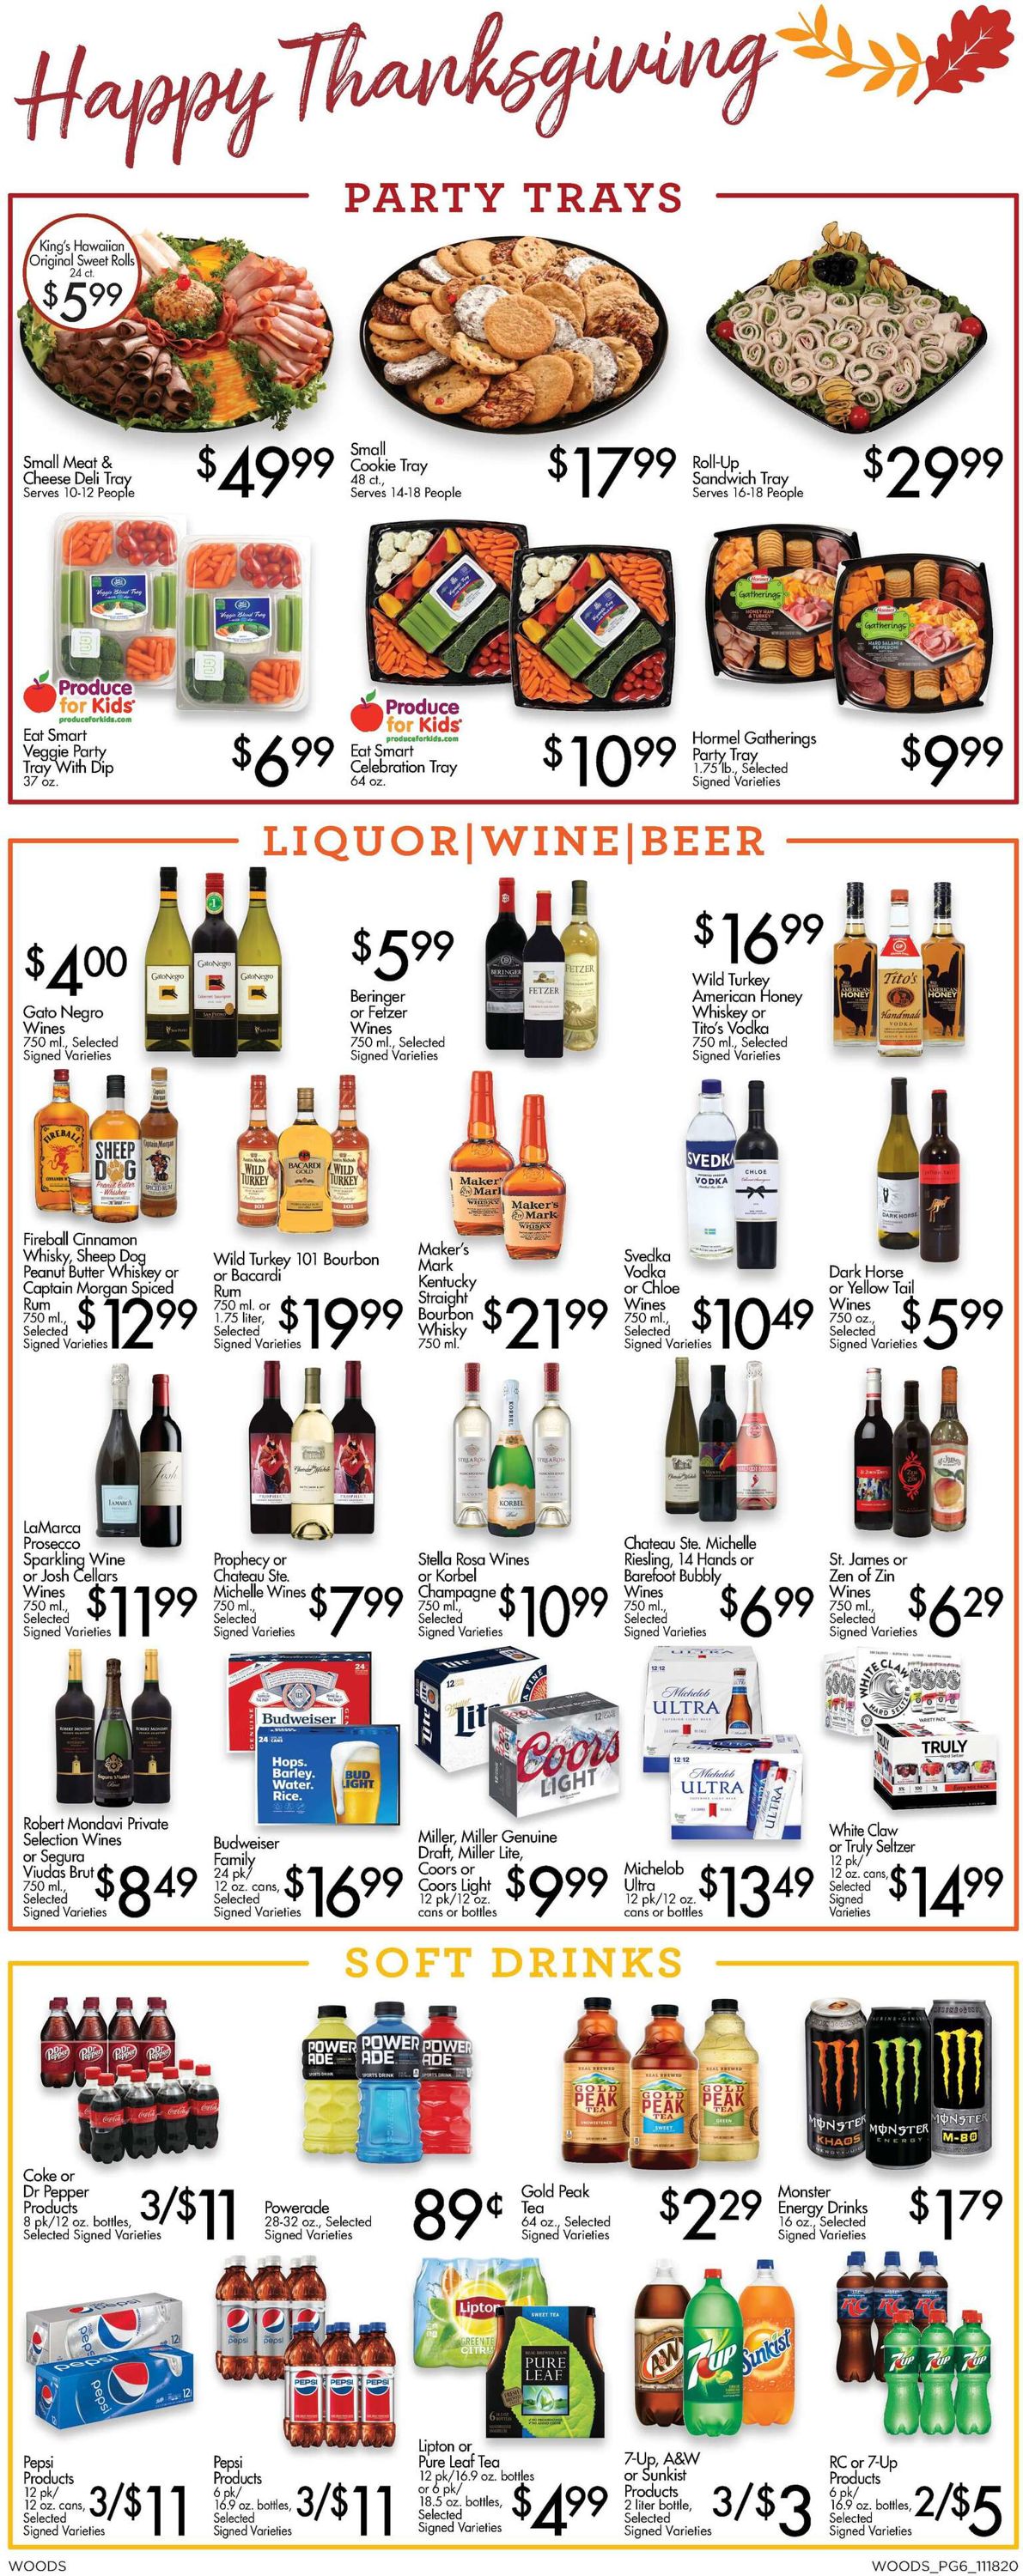 Woods Supermarket Thanksgiving ad 2020 Weekly Ad Circular - valid 11/18-11/25/2020 (Page 6)